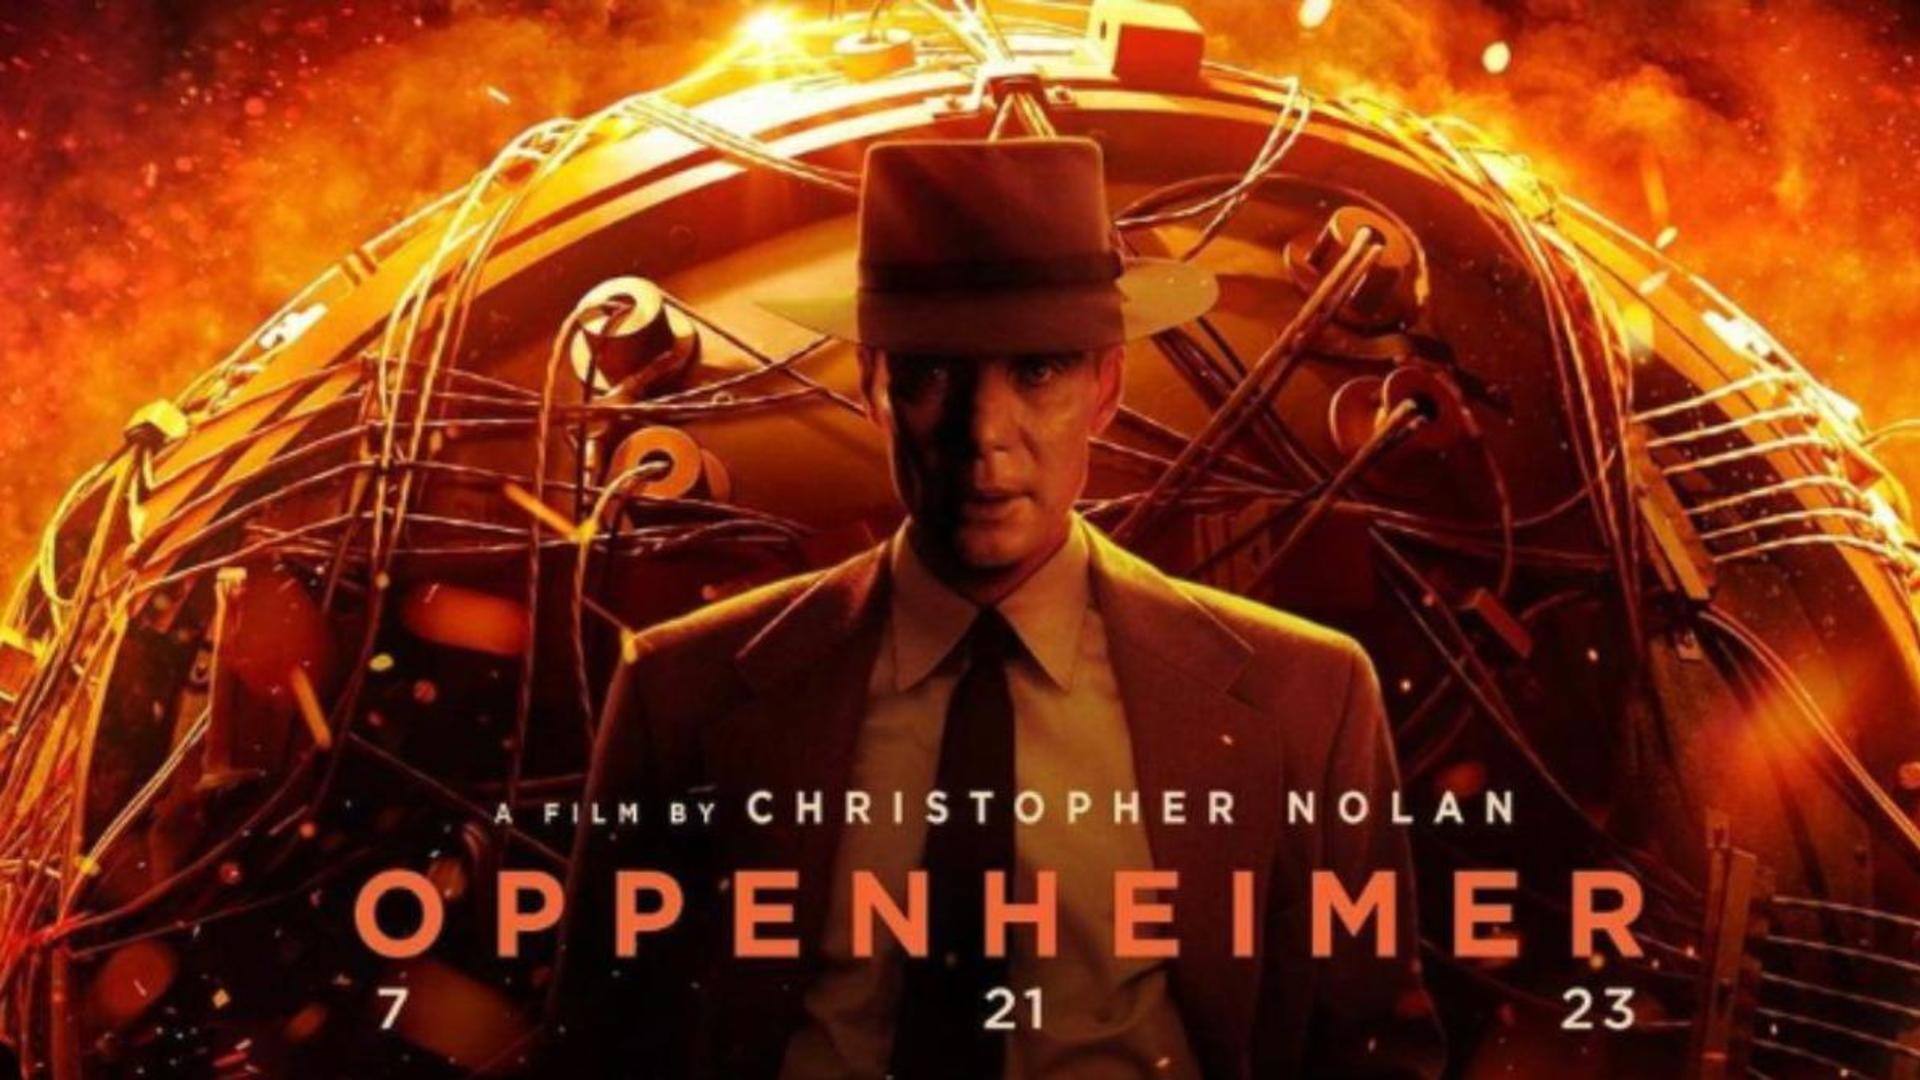 #BoxOfficeCollection: 'Oppenheimer' reigns supreme with unprecedented earnings on Day 2